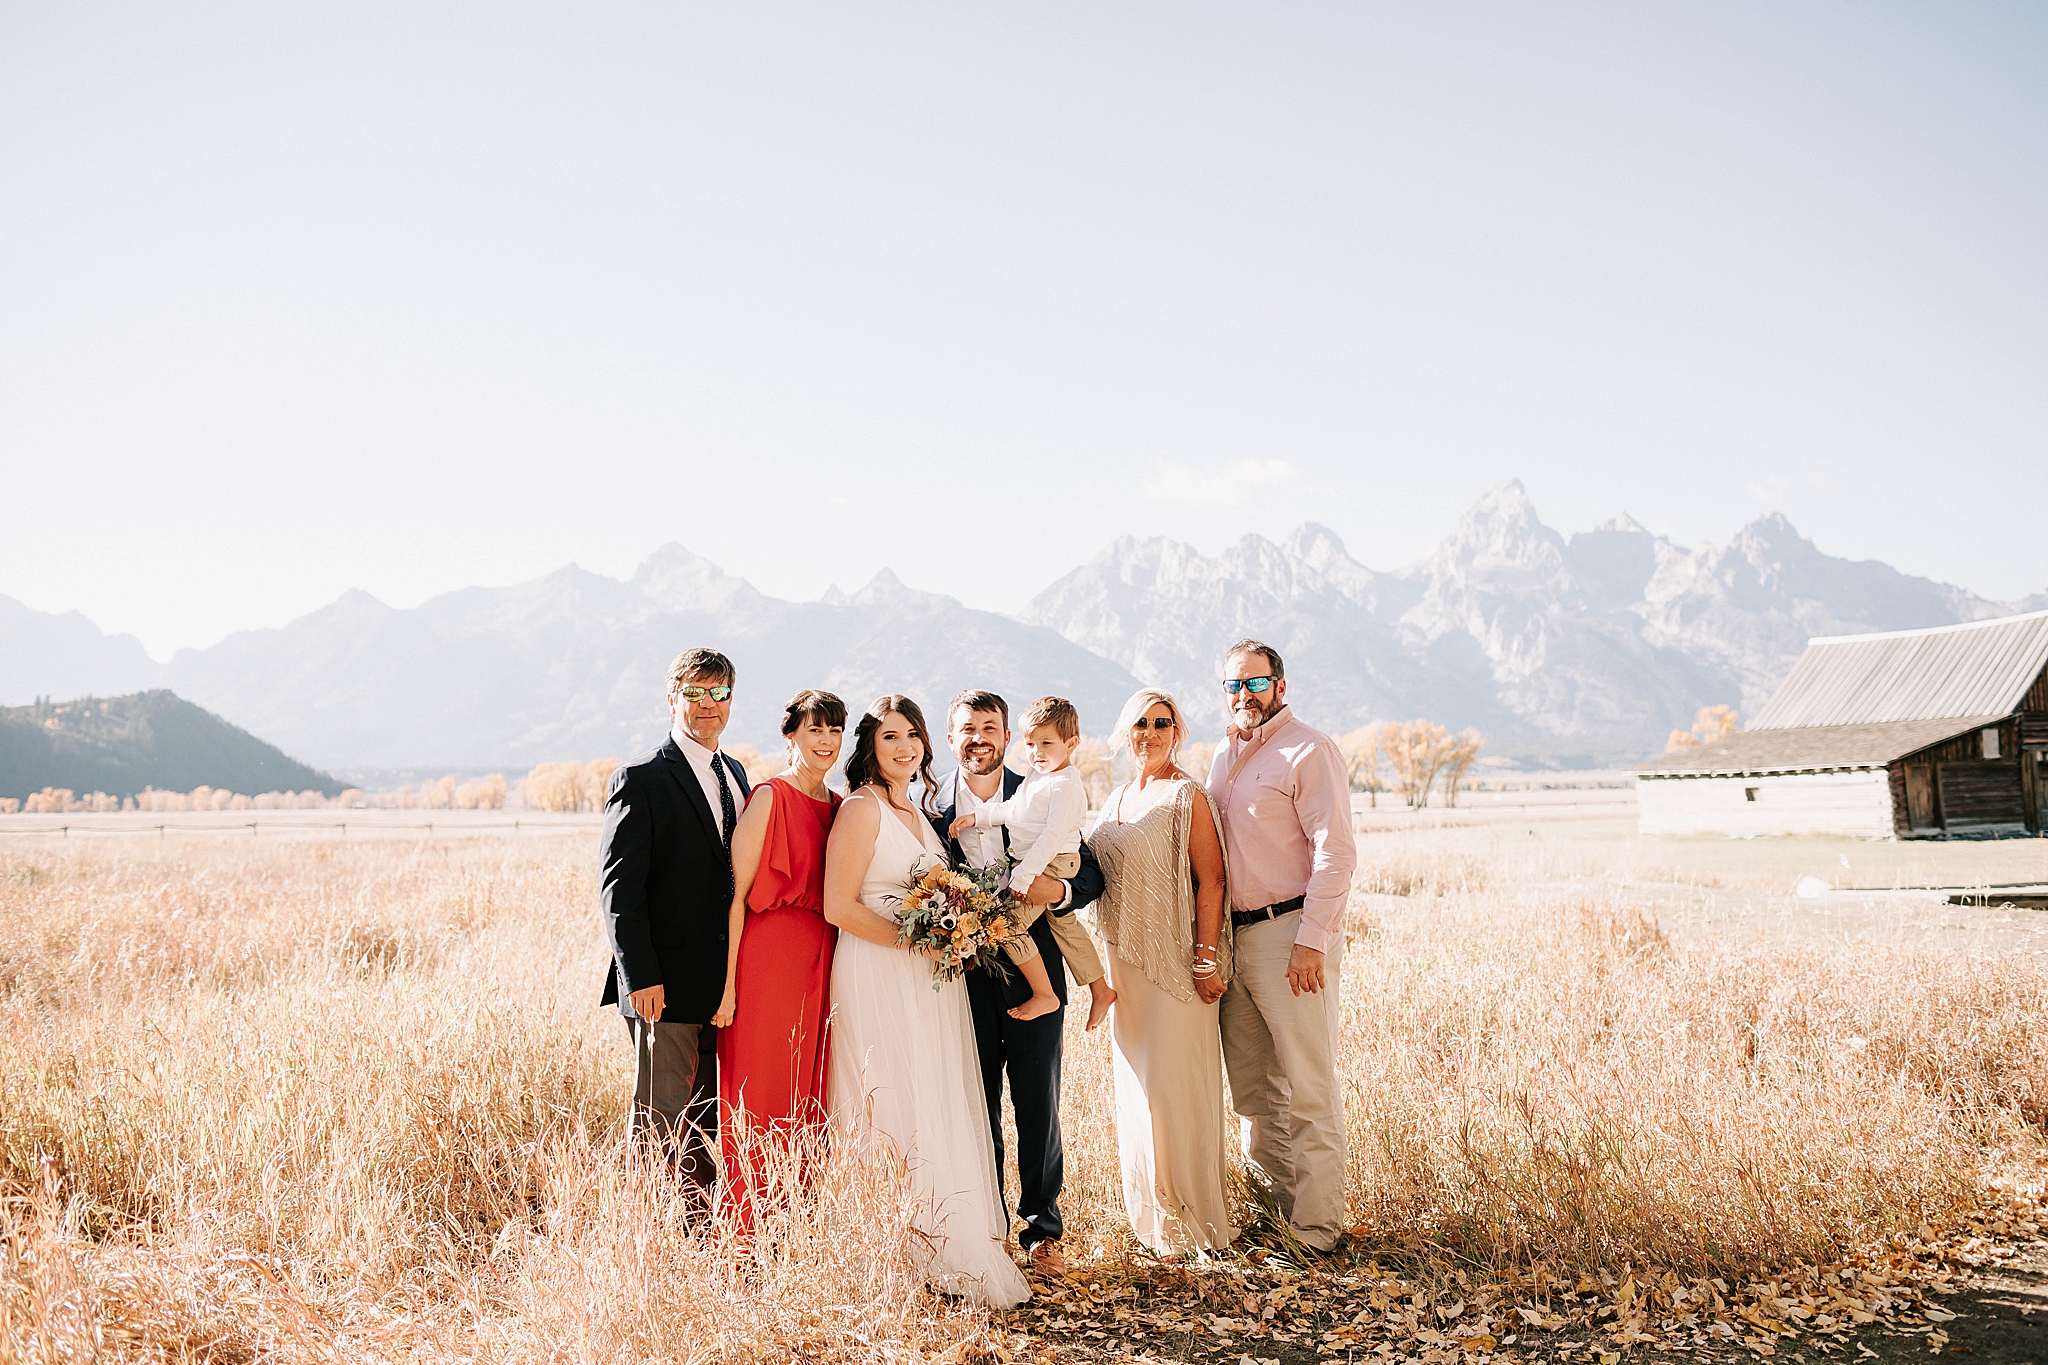 the whole group at an intimate moulton barn wedding in grand teton national park smiling at the camera.